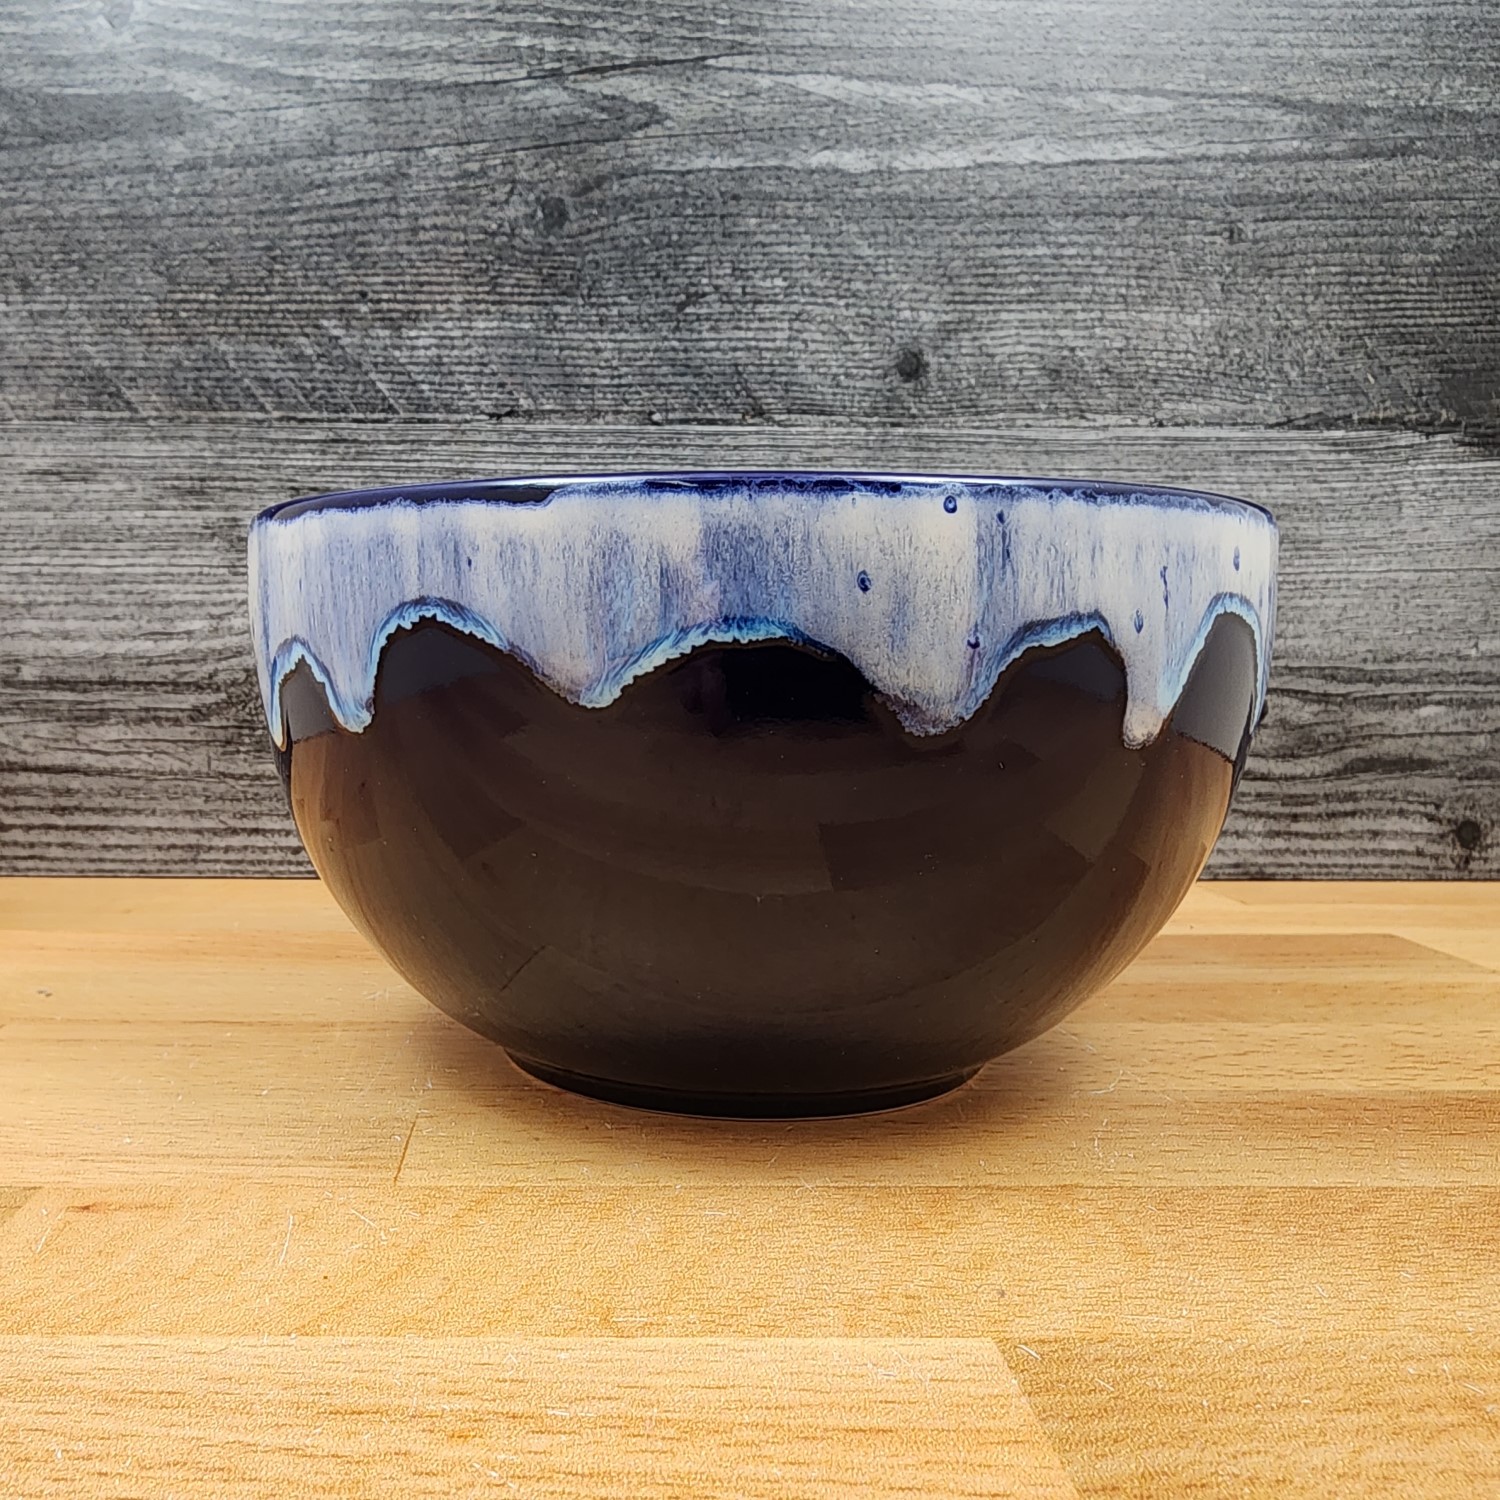 This Drip Glaze Blue White Bowl 6 inch (15cm) Dish by Blue Sky is made with love by Premier Homegoods! Shop more unique gift ideas today with Spots Initiatives, the best way to support creators.